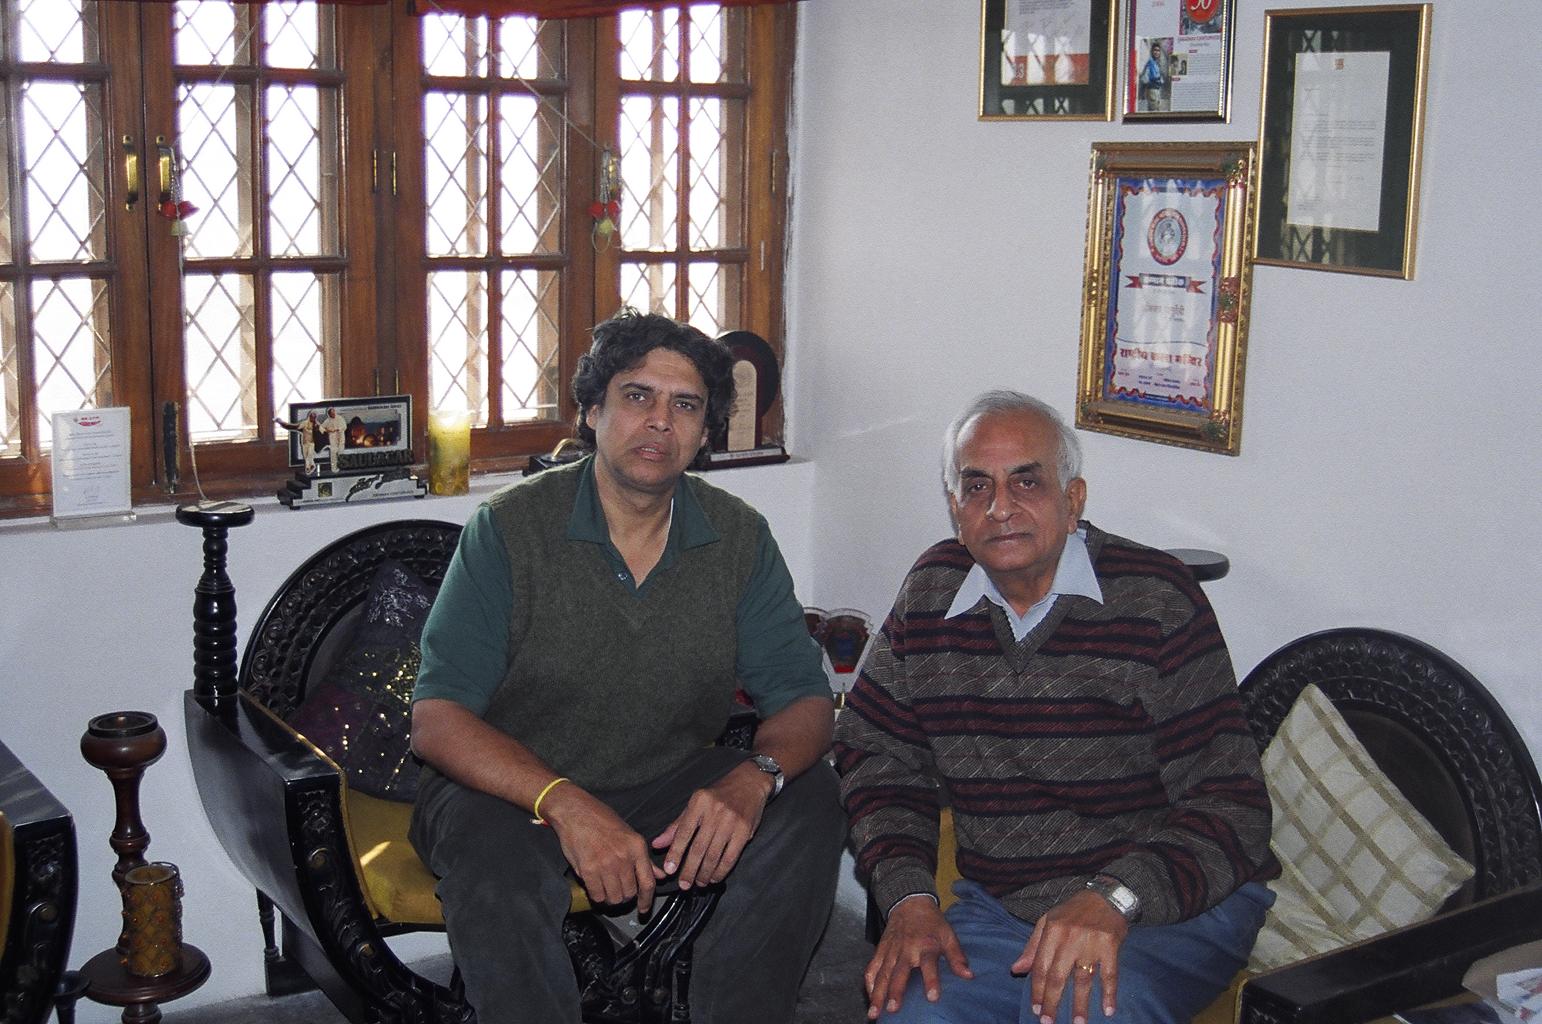 Myself with my Uncle, Bipin Cha Cha; a retired Electrical Engineer from BHEL (Bharat Heavy Electrical Limited) in New Delhi. Bipin Cha Cha is employed presently as an Engineering Consultant, for a private firm in NOIDA, Uttar Pradesh.